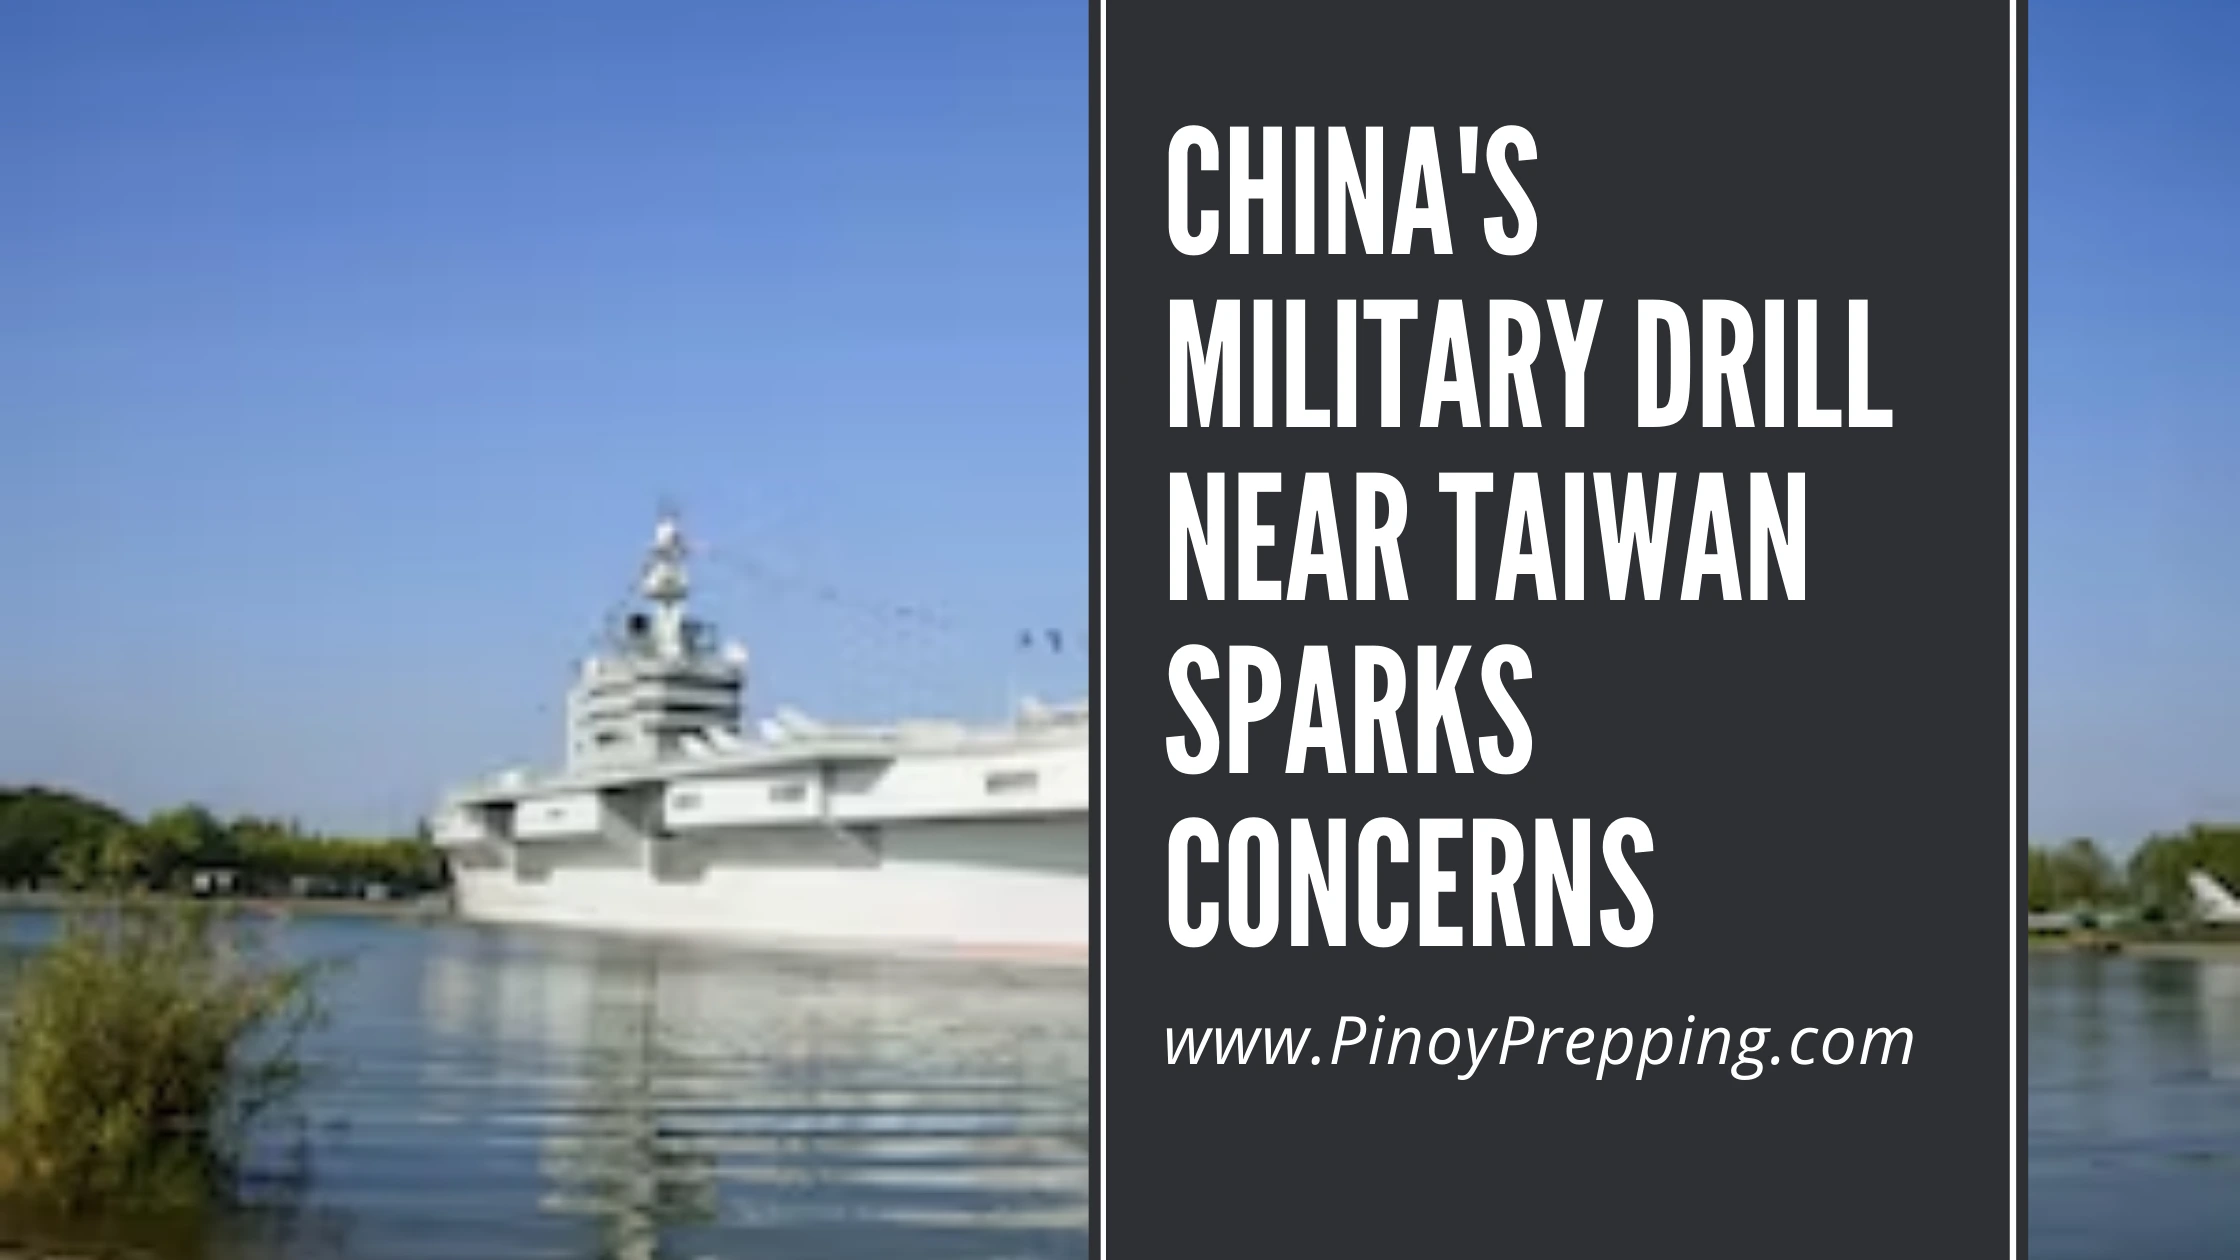 China’s Heightened Military Presence near Taiwan Sparks Concerns